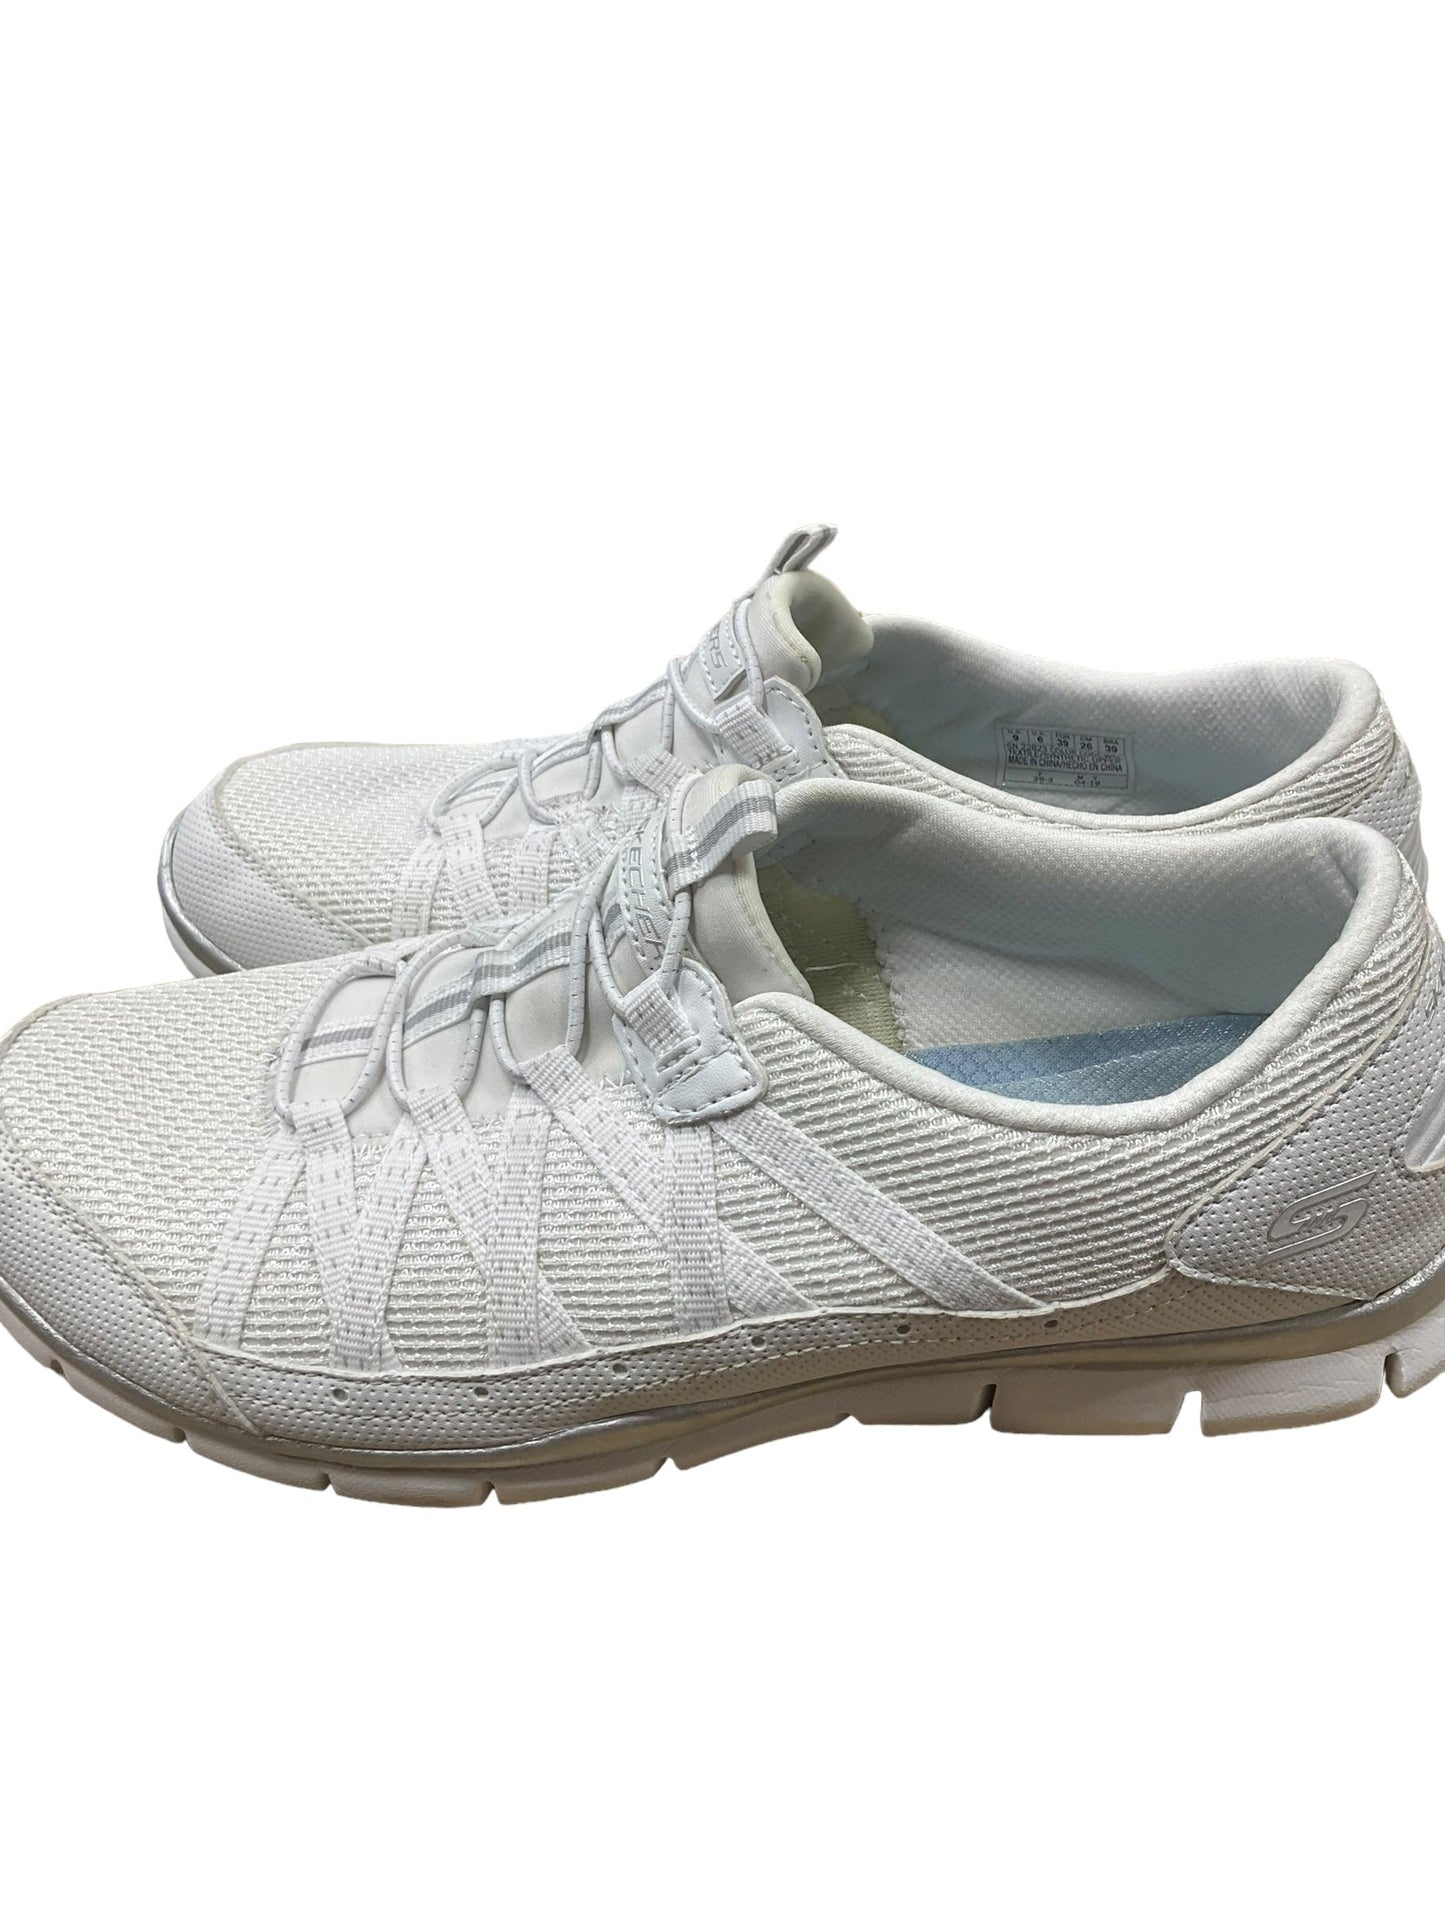 White Shoes Athletic Skechers, Size 9